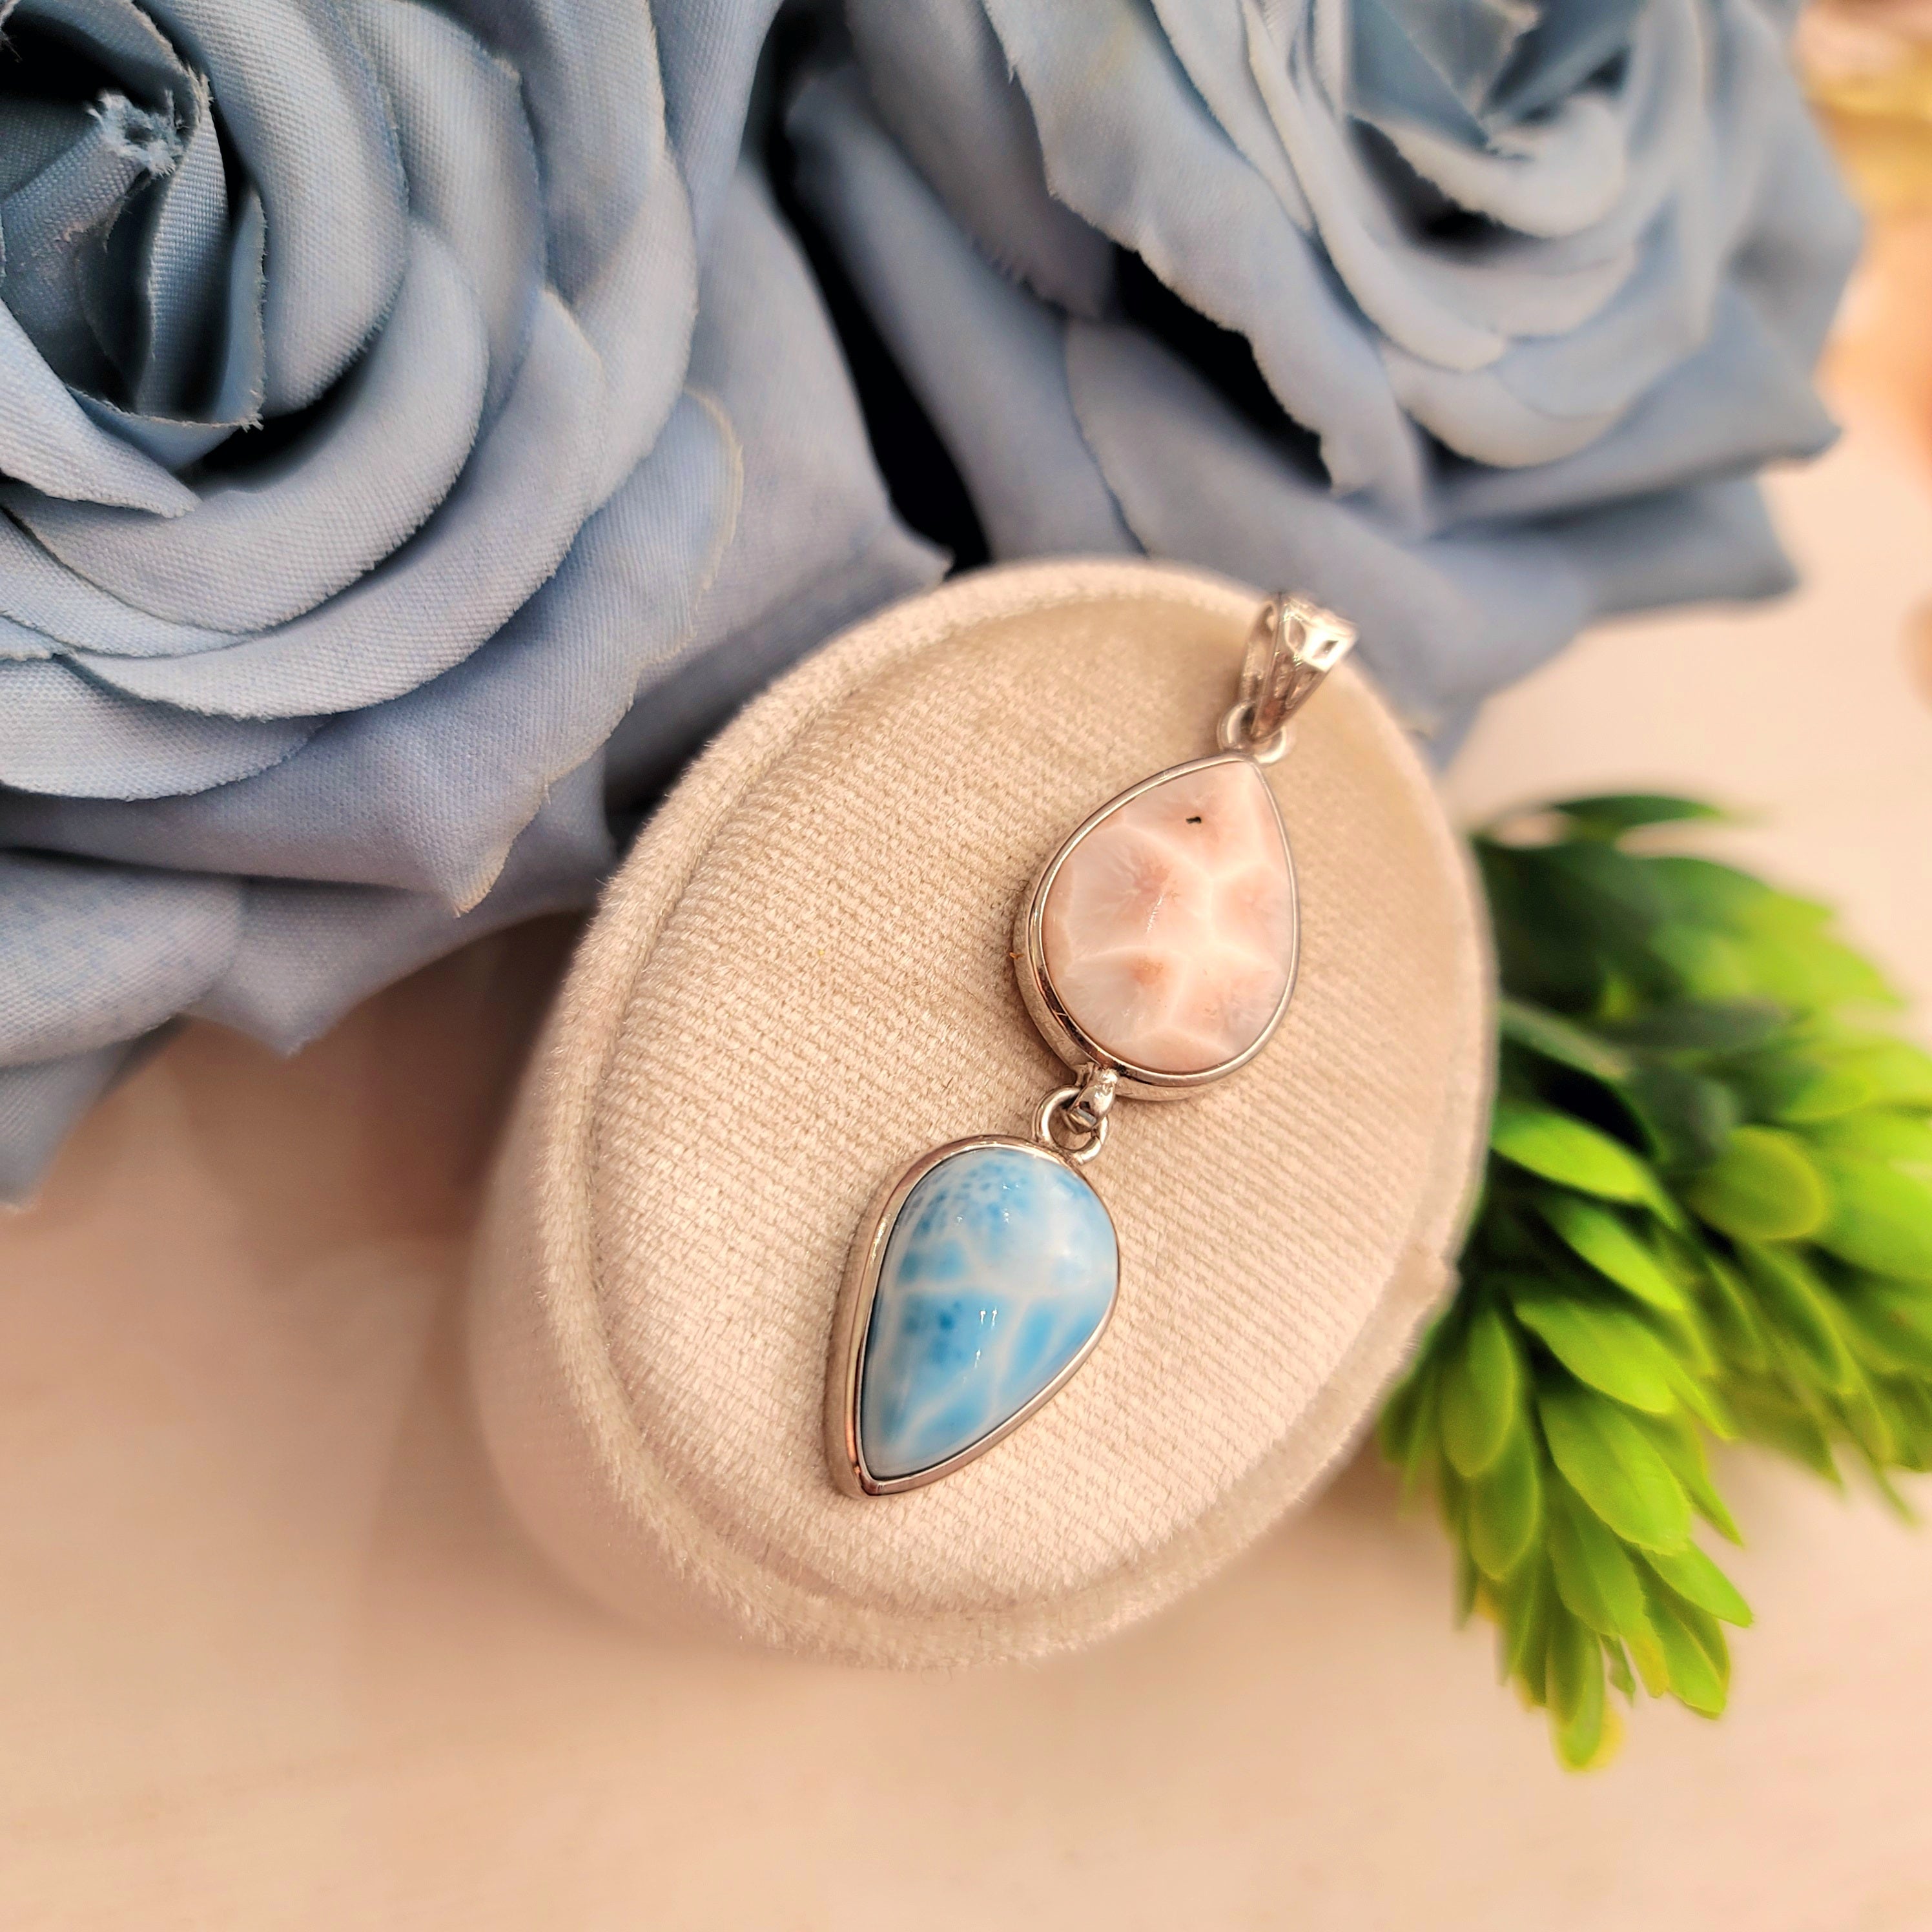 Larimar and Natrolite Pendant for Awakening your Intuitive Powers and Tranquility